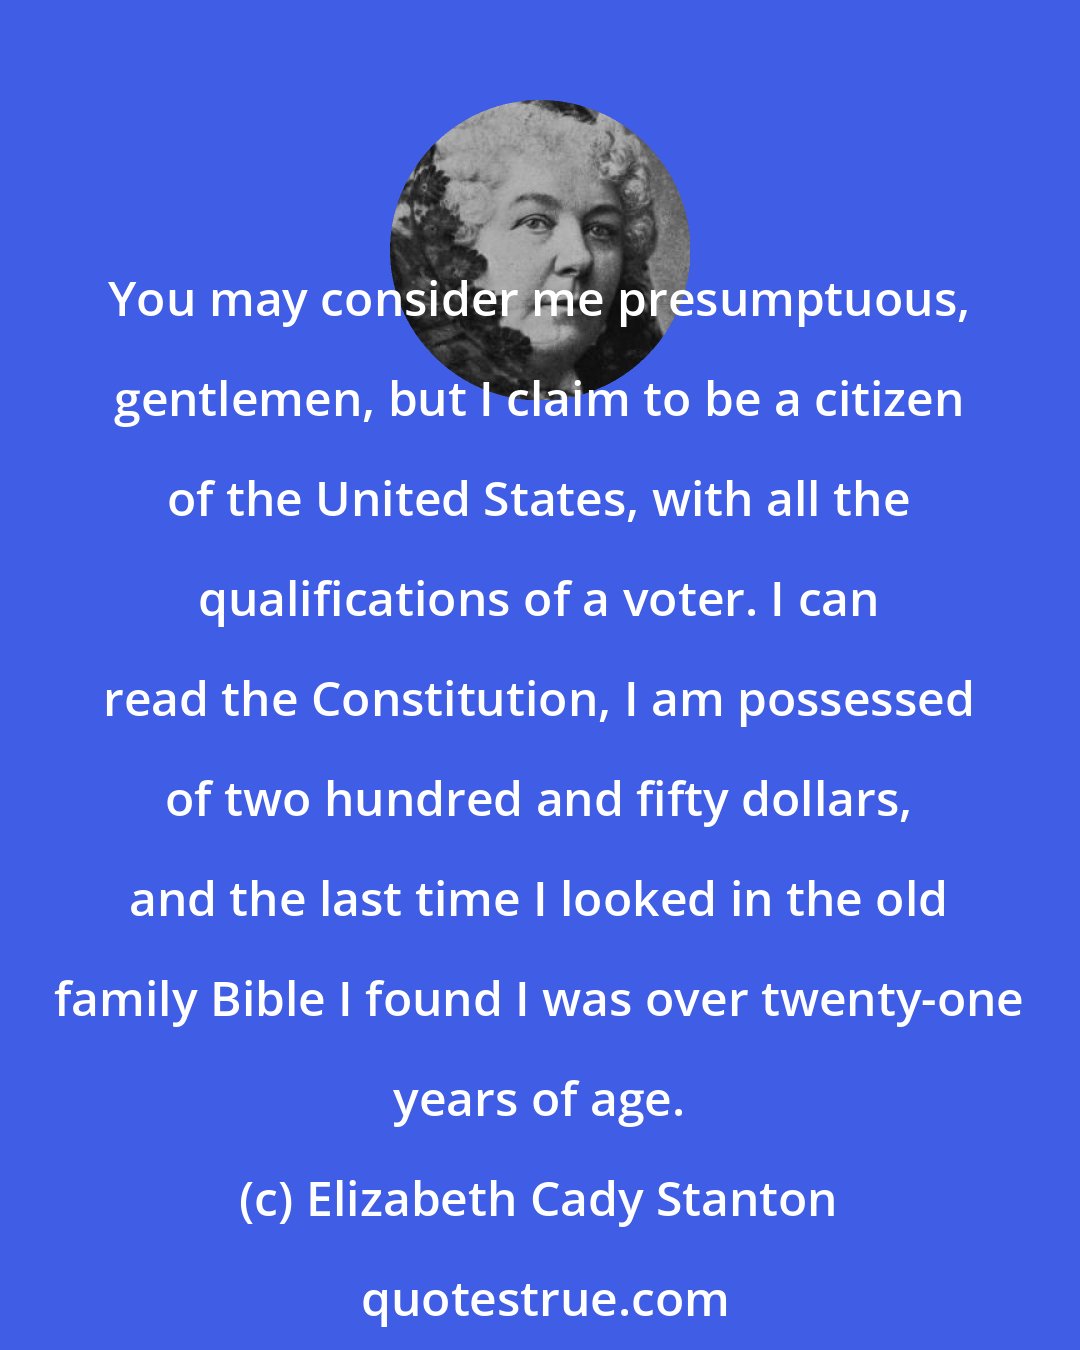 Elizabeth Cady Stanton: You may consider me presumptuous, gentlemen, but I claim to be a citizen of the United States, with all the qualifications of a voter. I can read the Constitution, I am possessed of two hundred and fifty dollars, and the last time I looked in the old family Bible I found I was over twenty-one years of age.